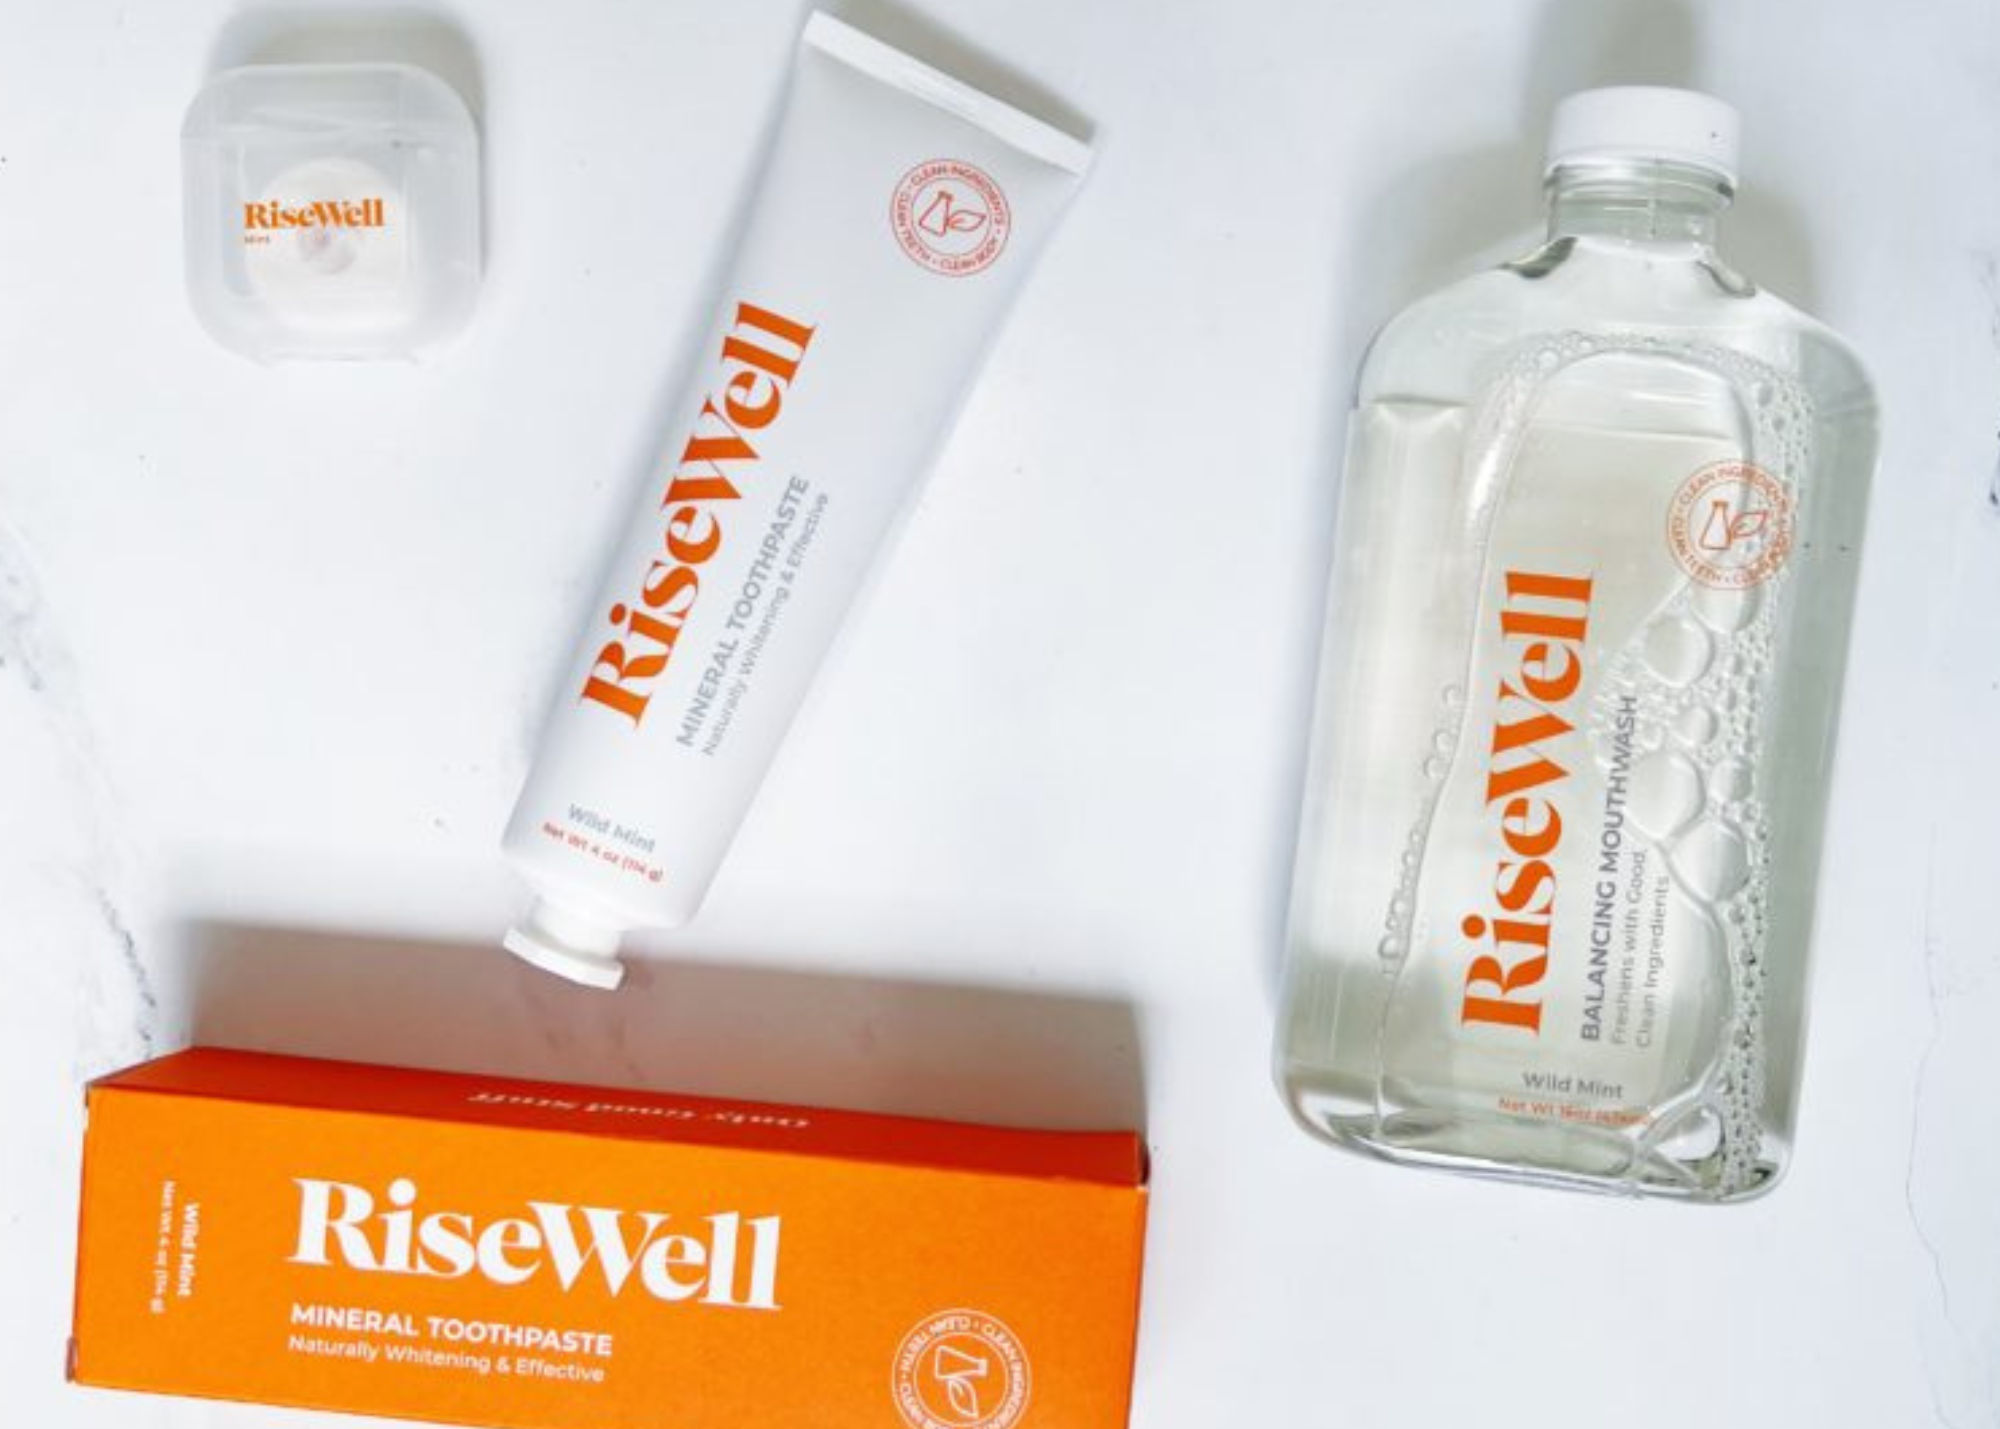 Risewell Toothpaste Review